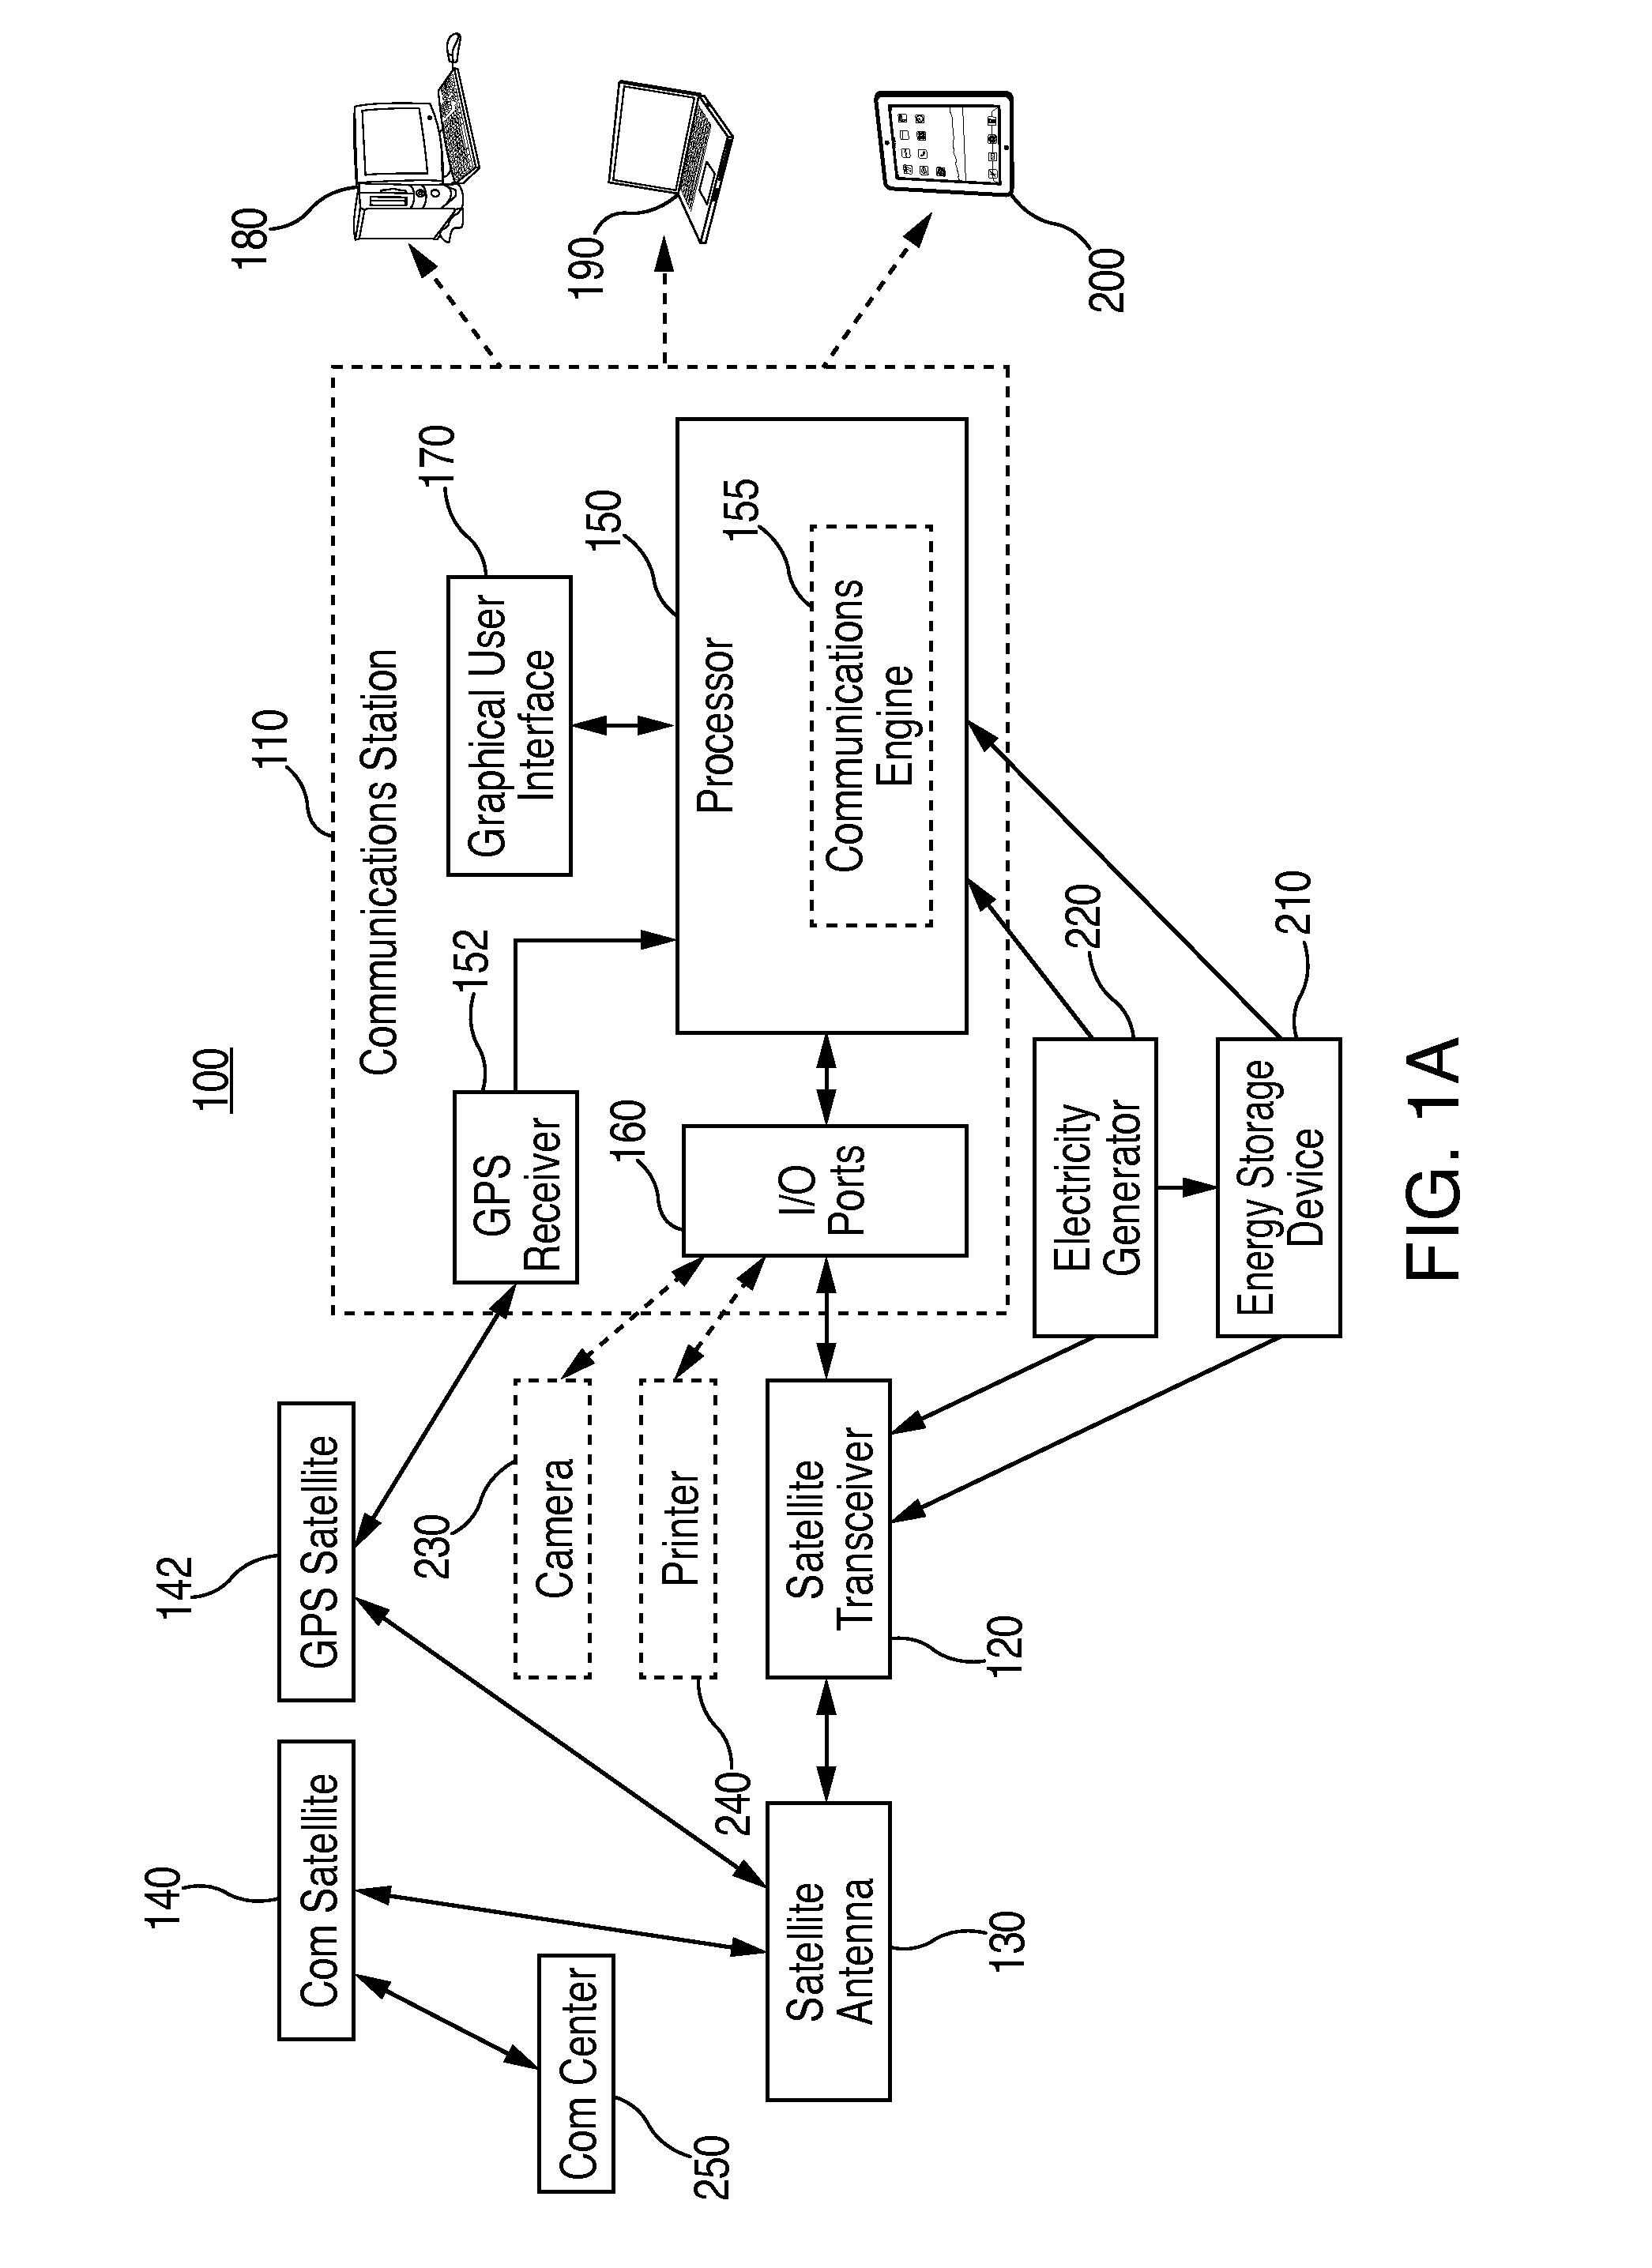 Self-contained multimedia integrated two-way satellite communication system